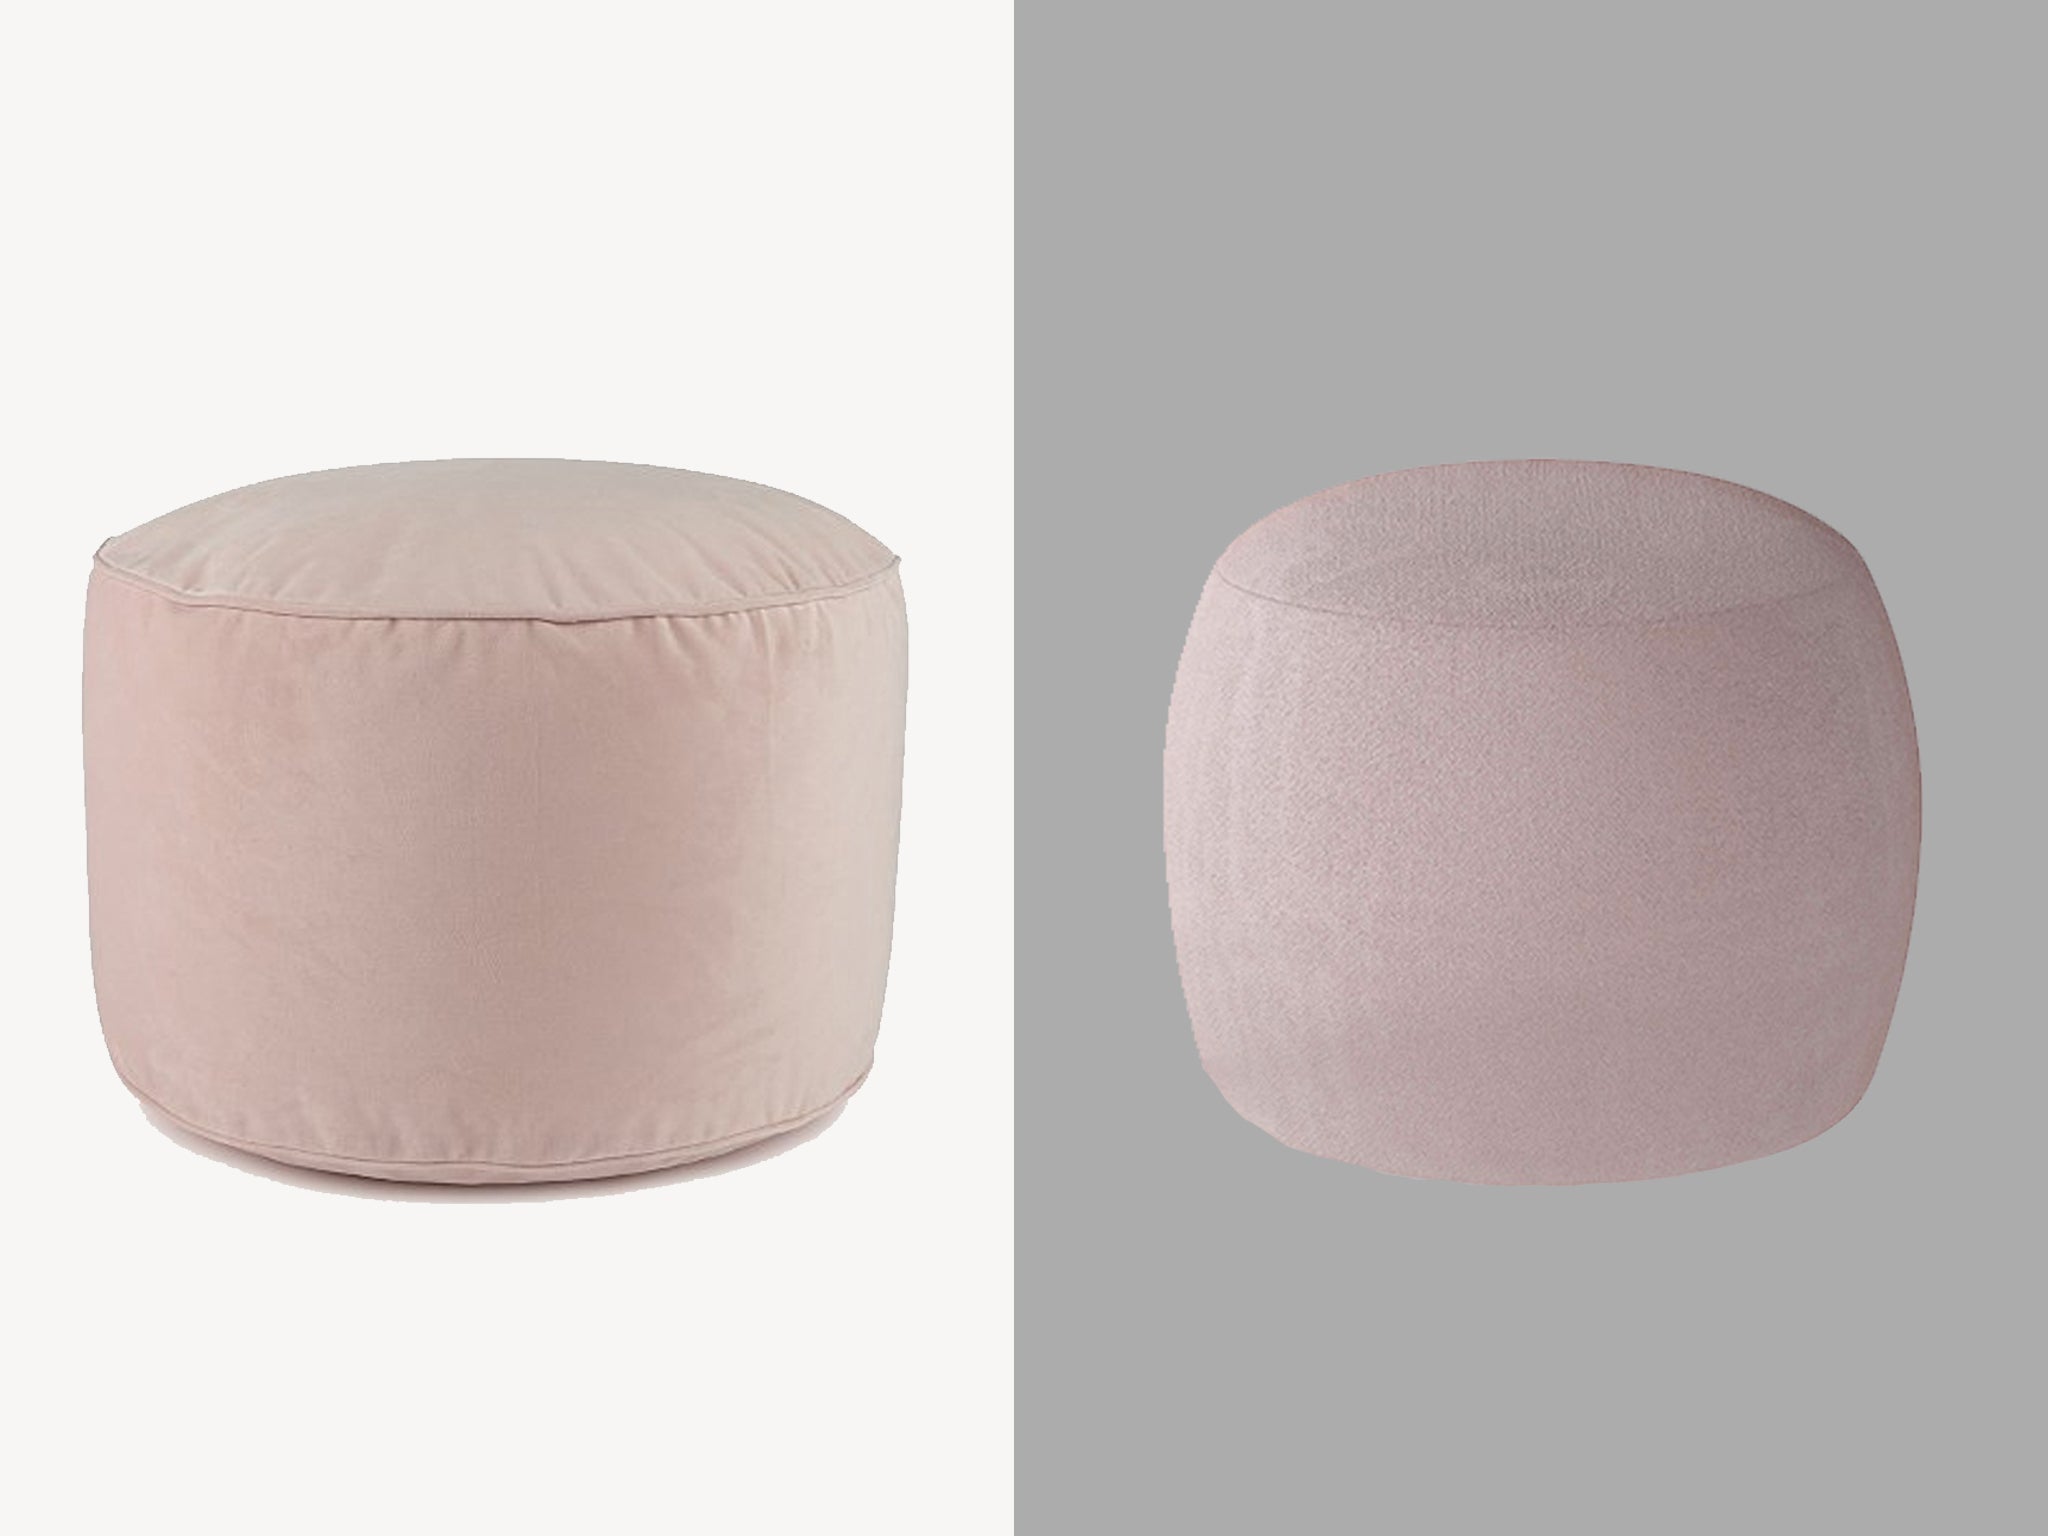 Asda’s pouffe on the left, and Loaf’s on the right